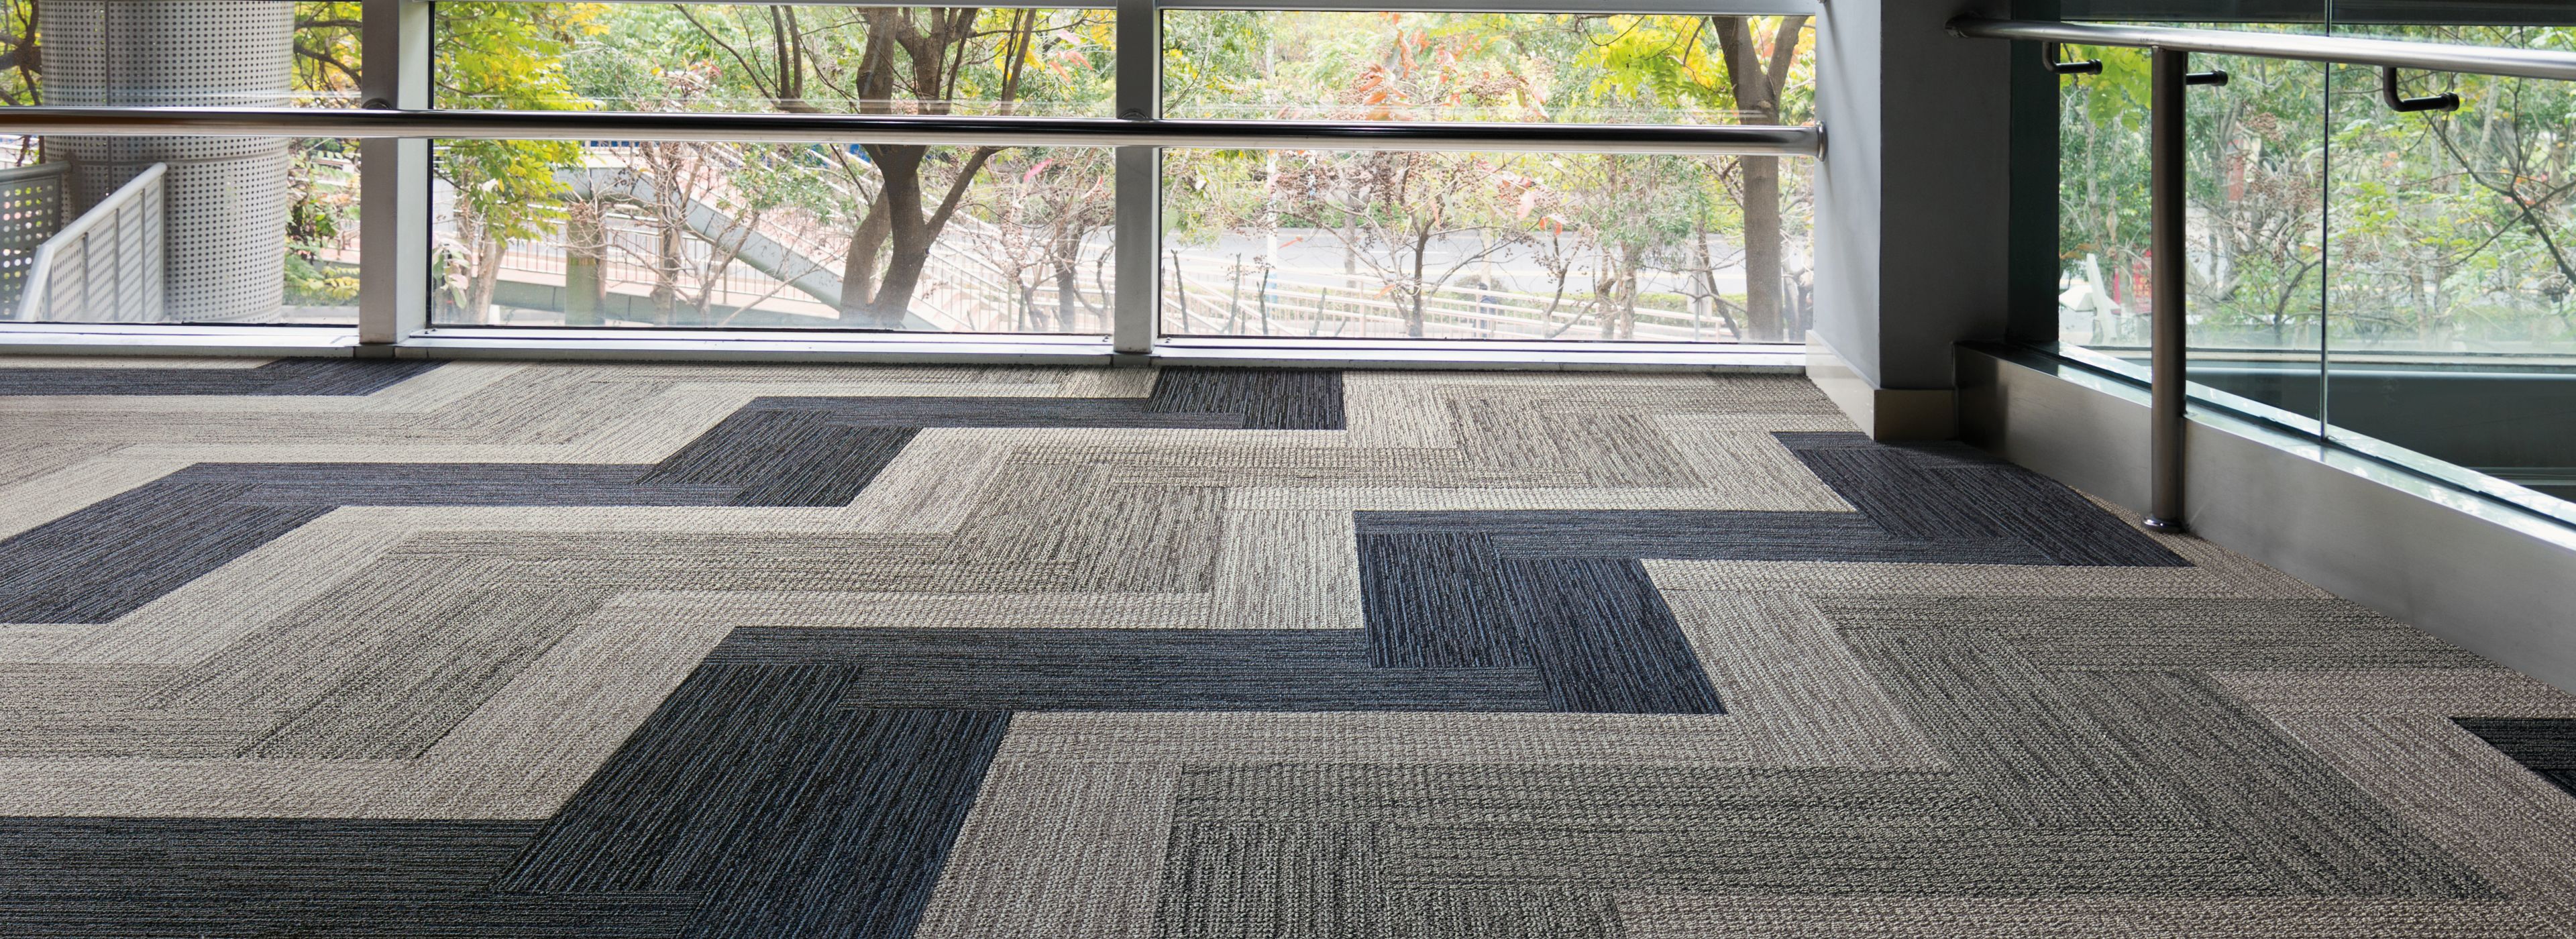 Interface Afternoon Light and Winter Sun carpet tile in open area with glass walls image number 1